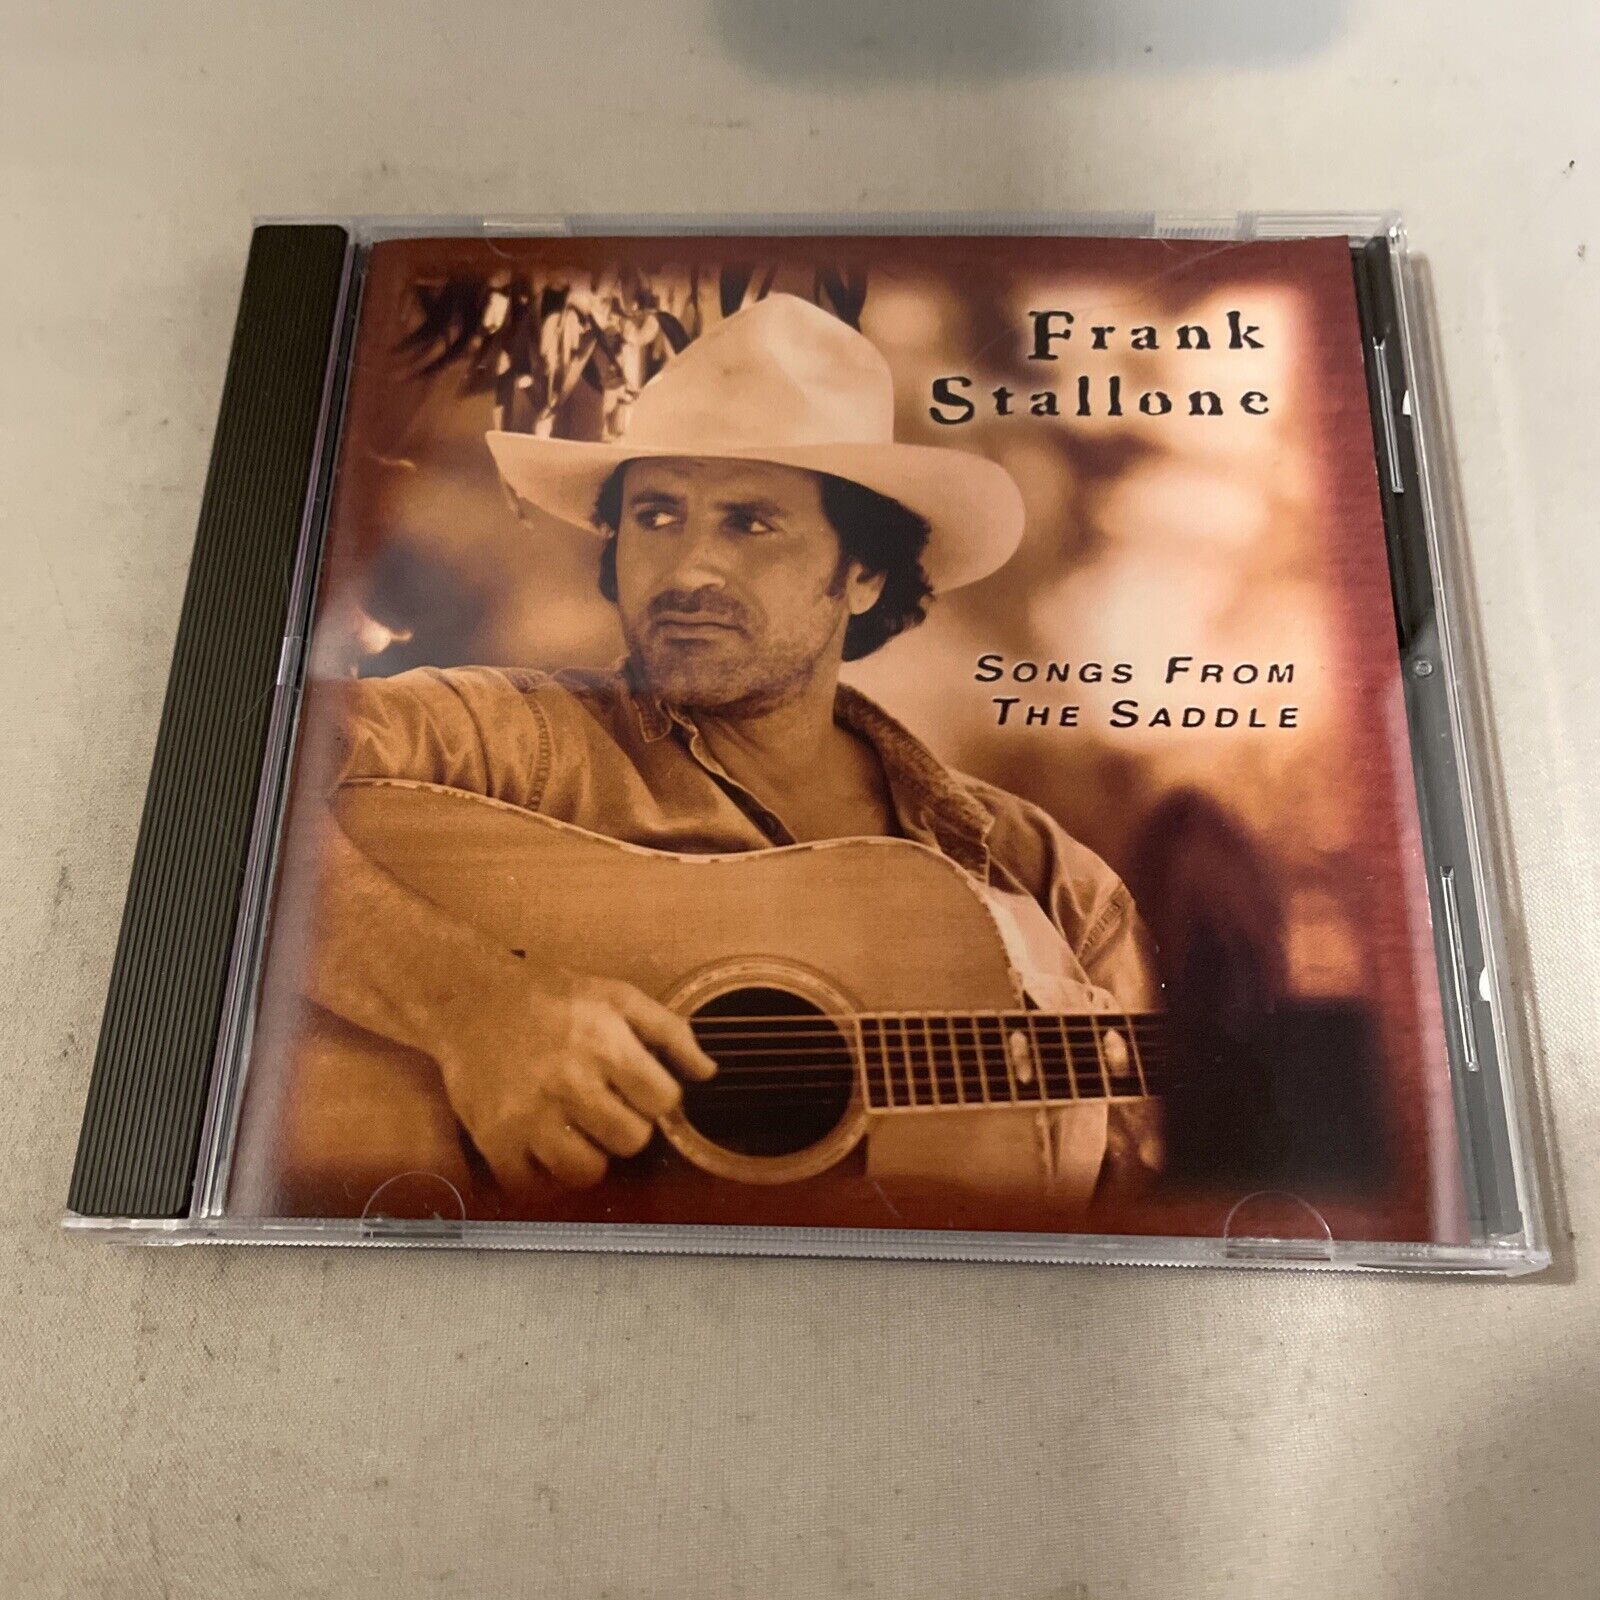 Songs from the Saddle by Frank Stallone (CD, 2006)